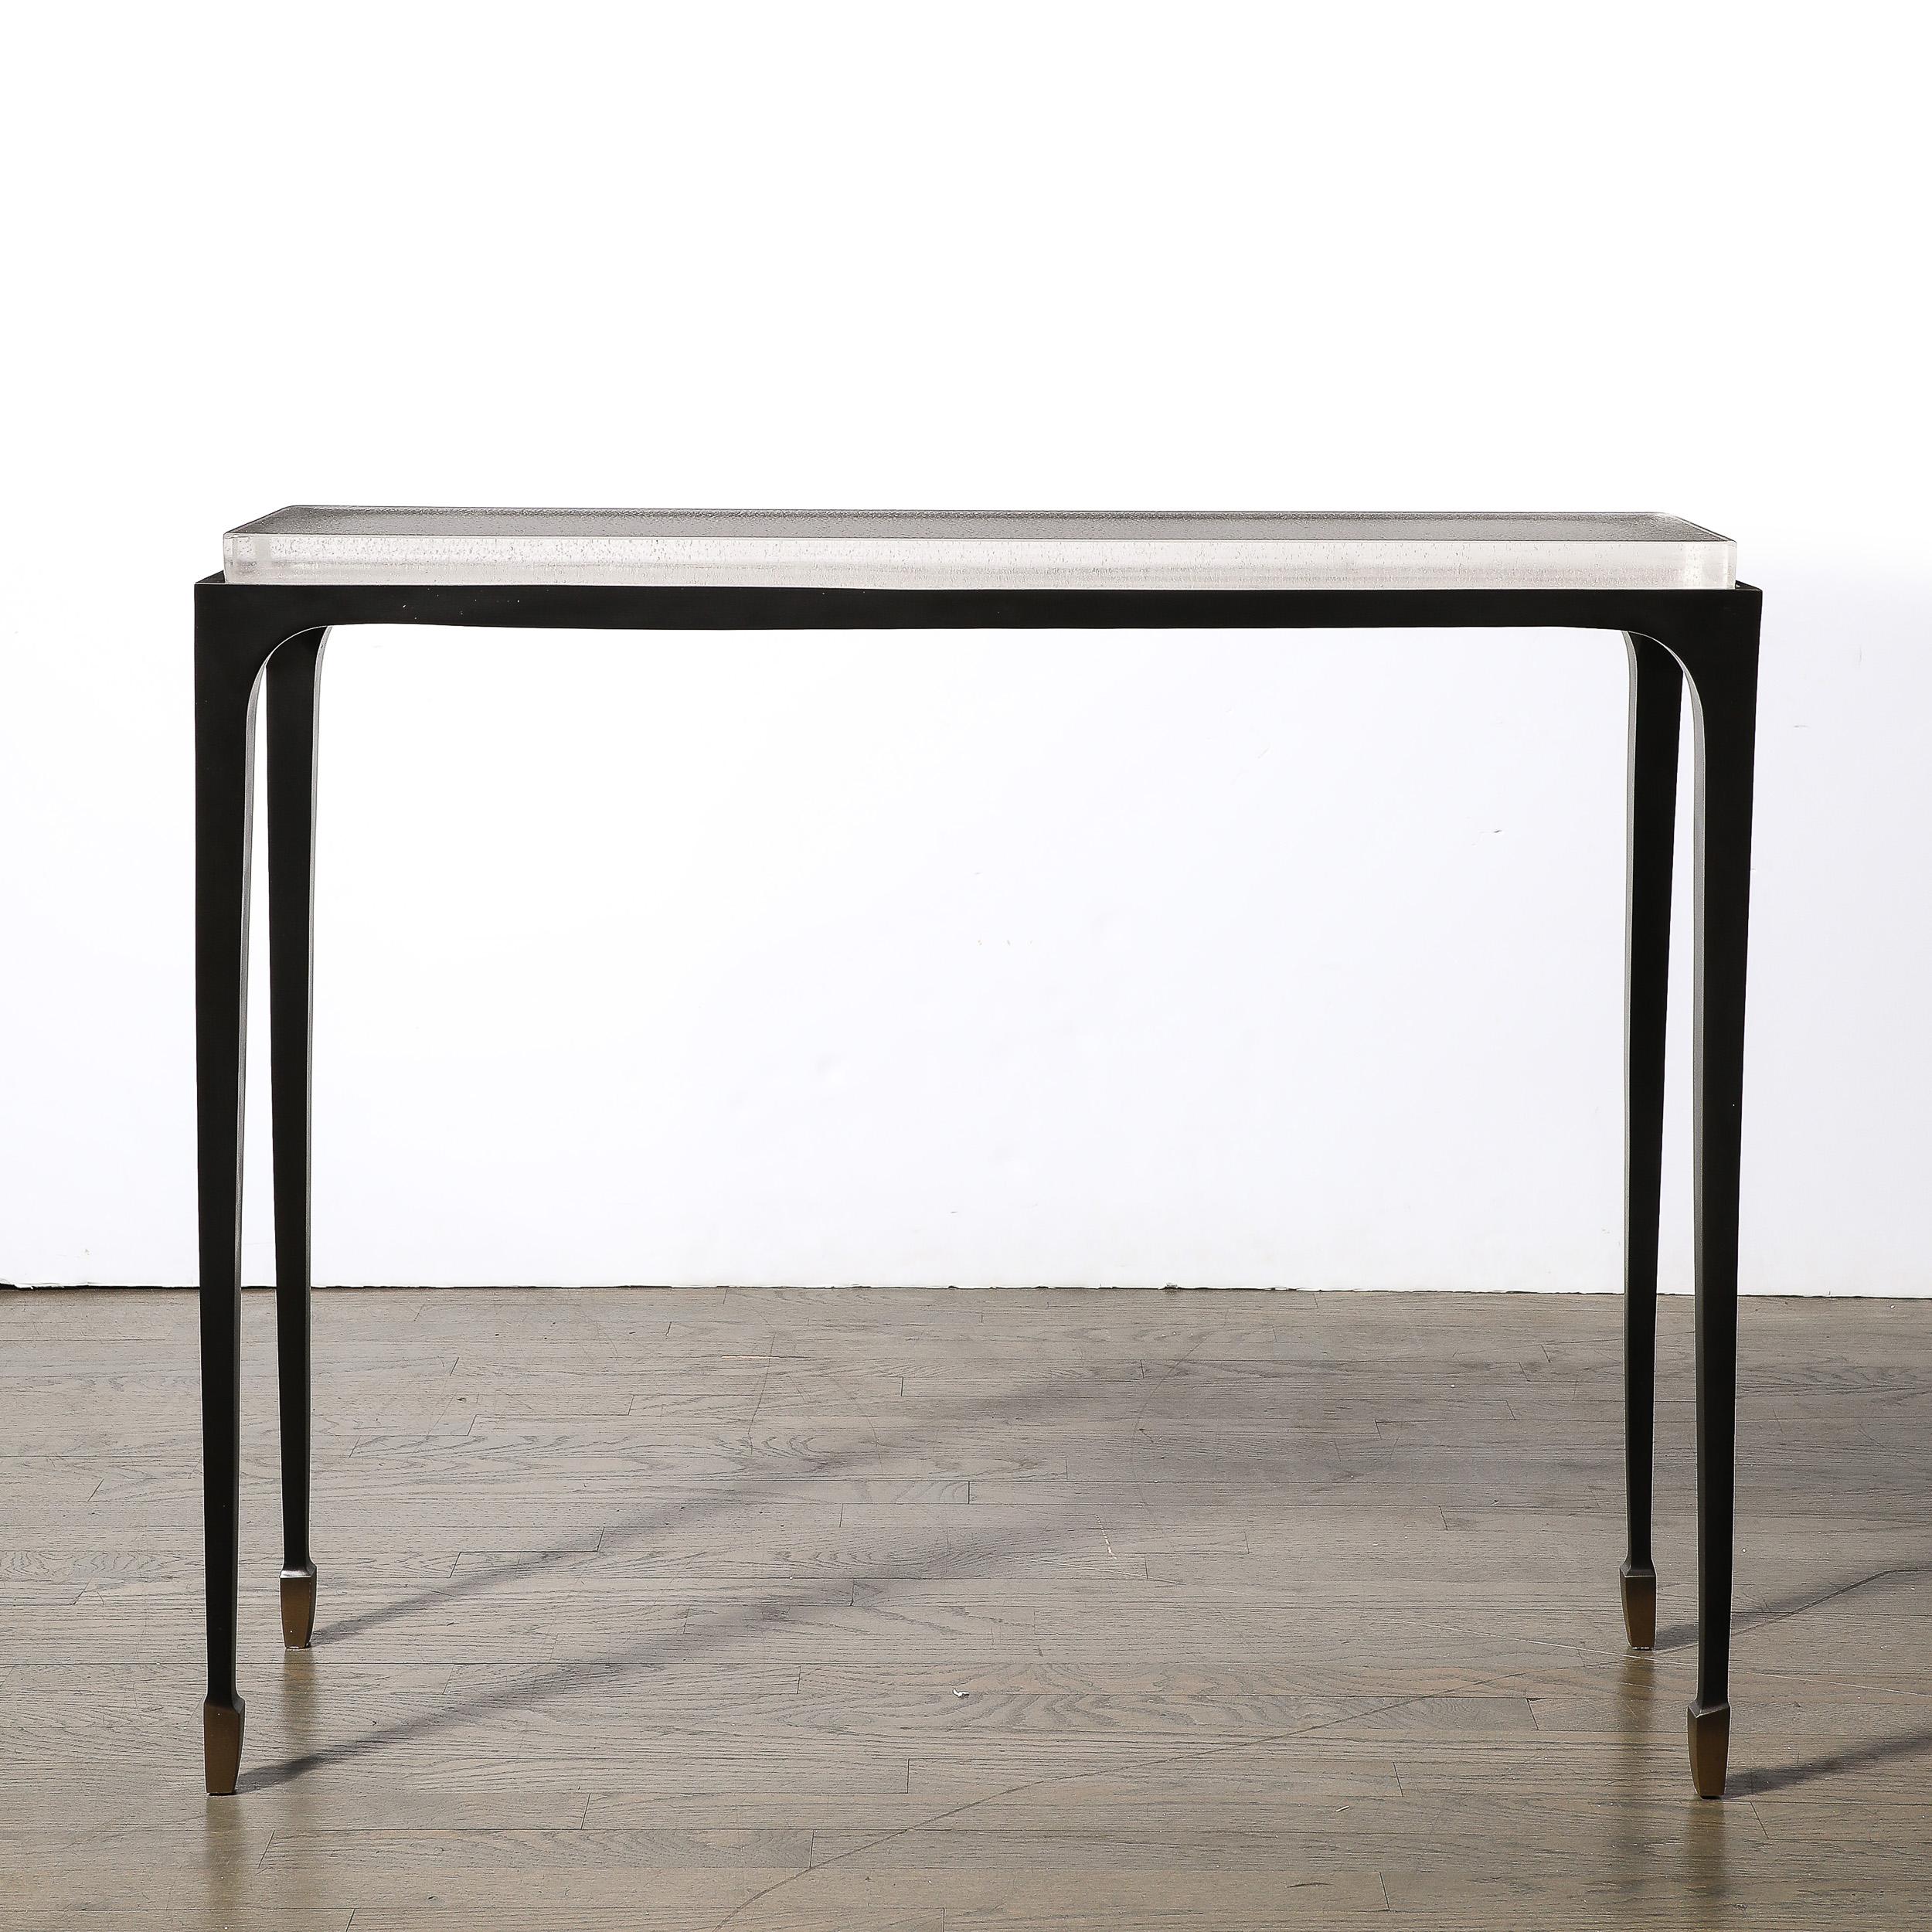 This highly sleek and elegant Modernist Sculptural Bronze and Inset Caste Ice Glass Console Table W/ Exposed Integral Brass Sabots is by Holly Hunt and originates from the United States, Circa 2010. The frame of the table is formed in bronze, with